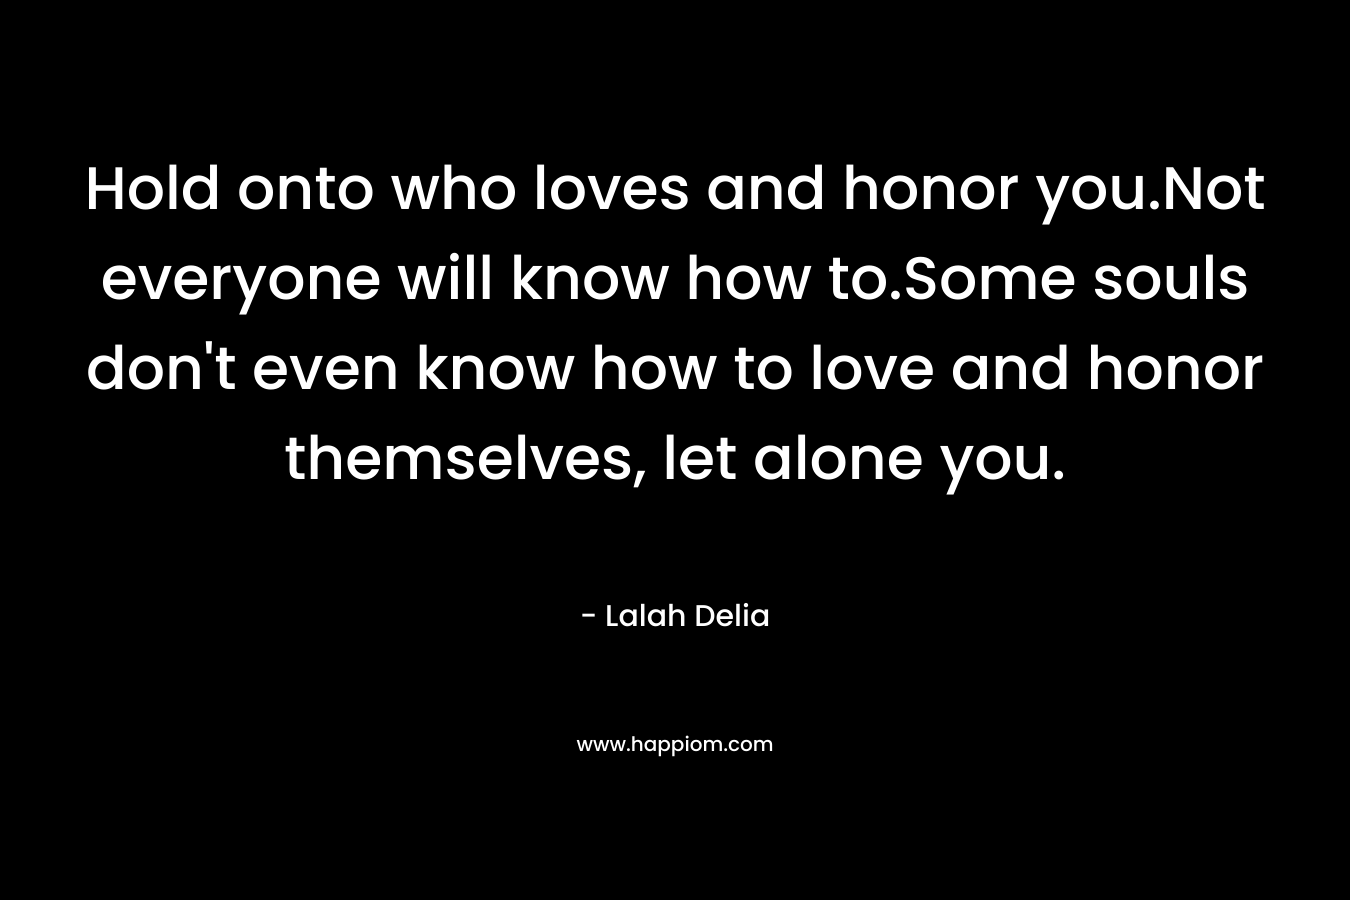 Hold onto who loves and honor you.Not everyone will know how to.Some souls don’t even know how to love and honor themselves, let alone you. – Lalah Delia